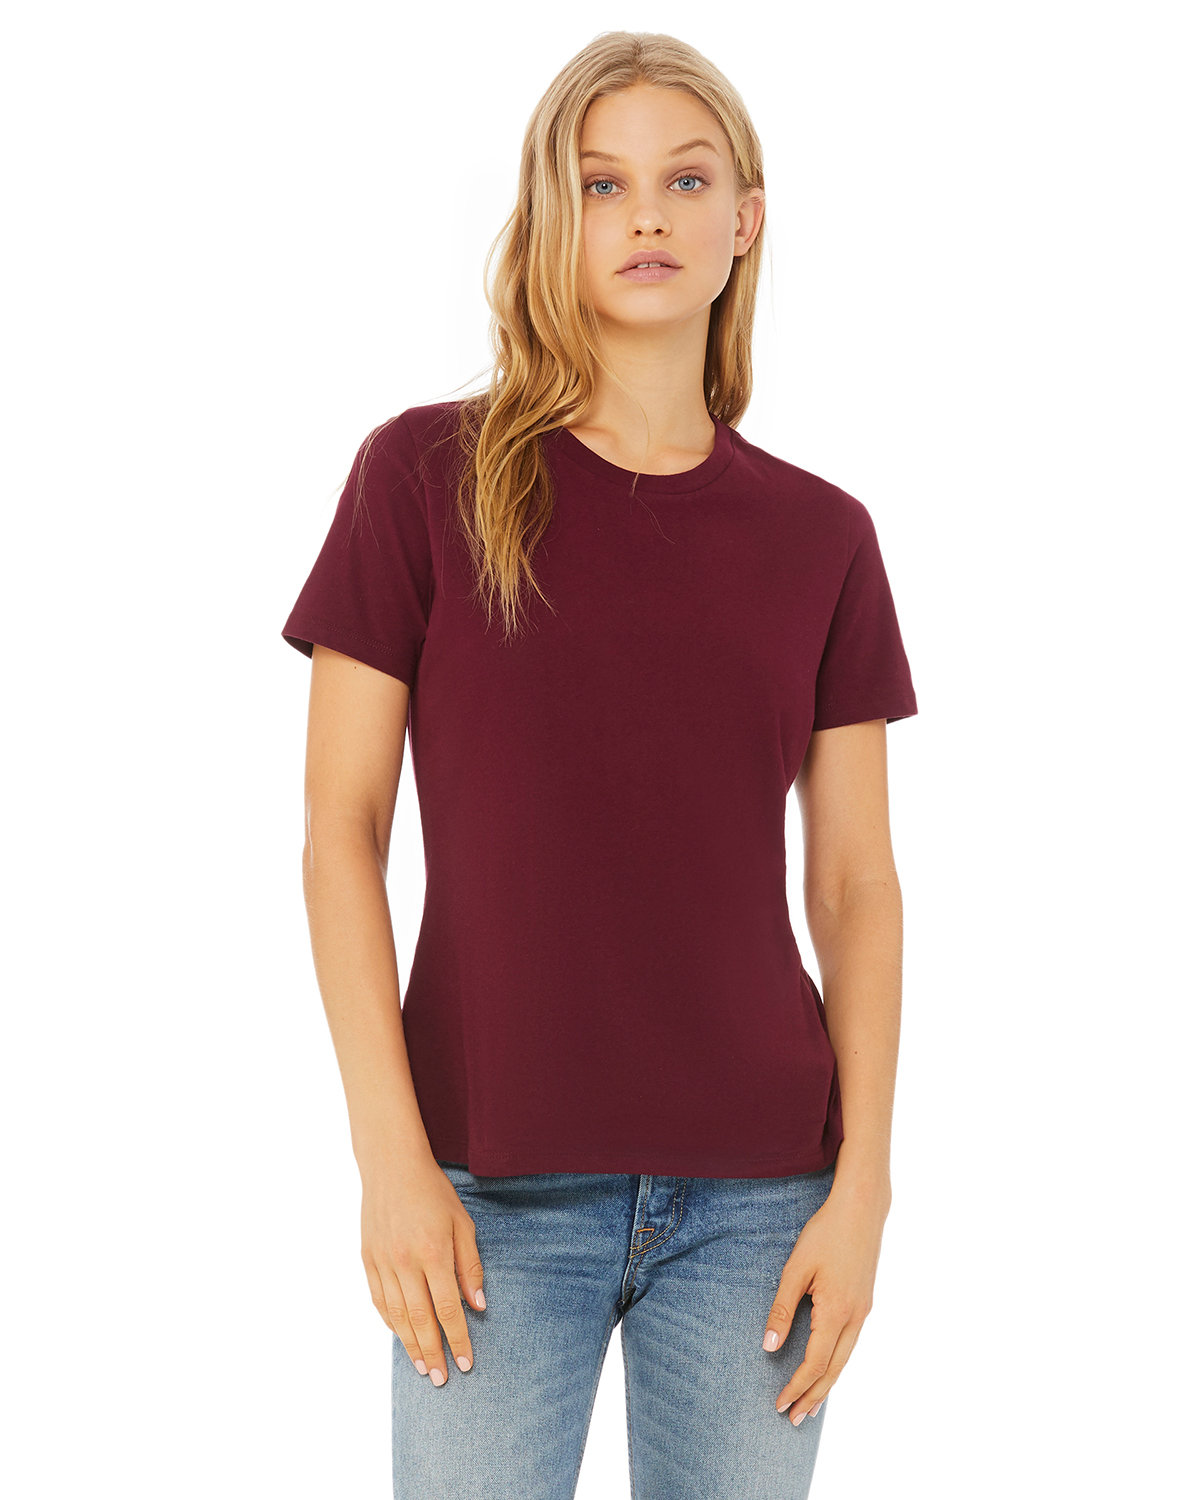 Bella + Canvas Ladies' Relaxed Jersey Short-Sleeve T-Shirt MAROON 